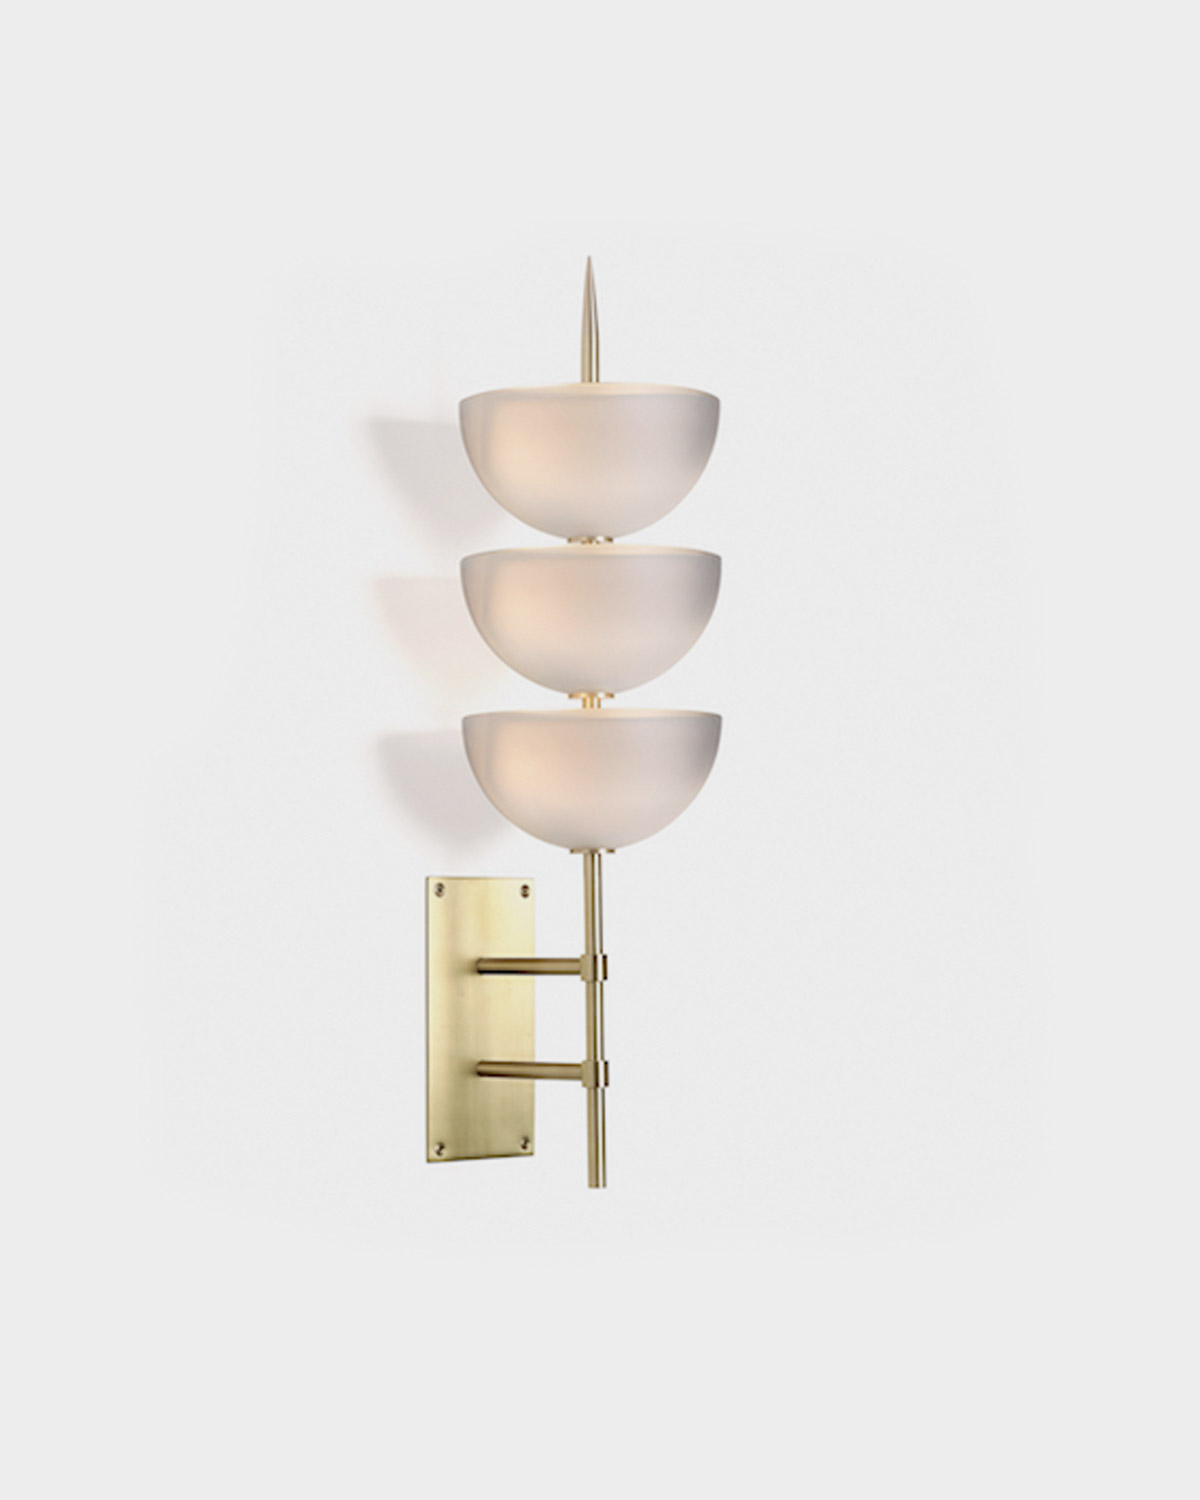 The Small Gilles Wall Sconce with Glass Shades By Studio Van den Akker